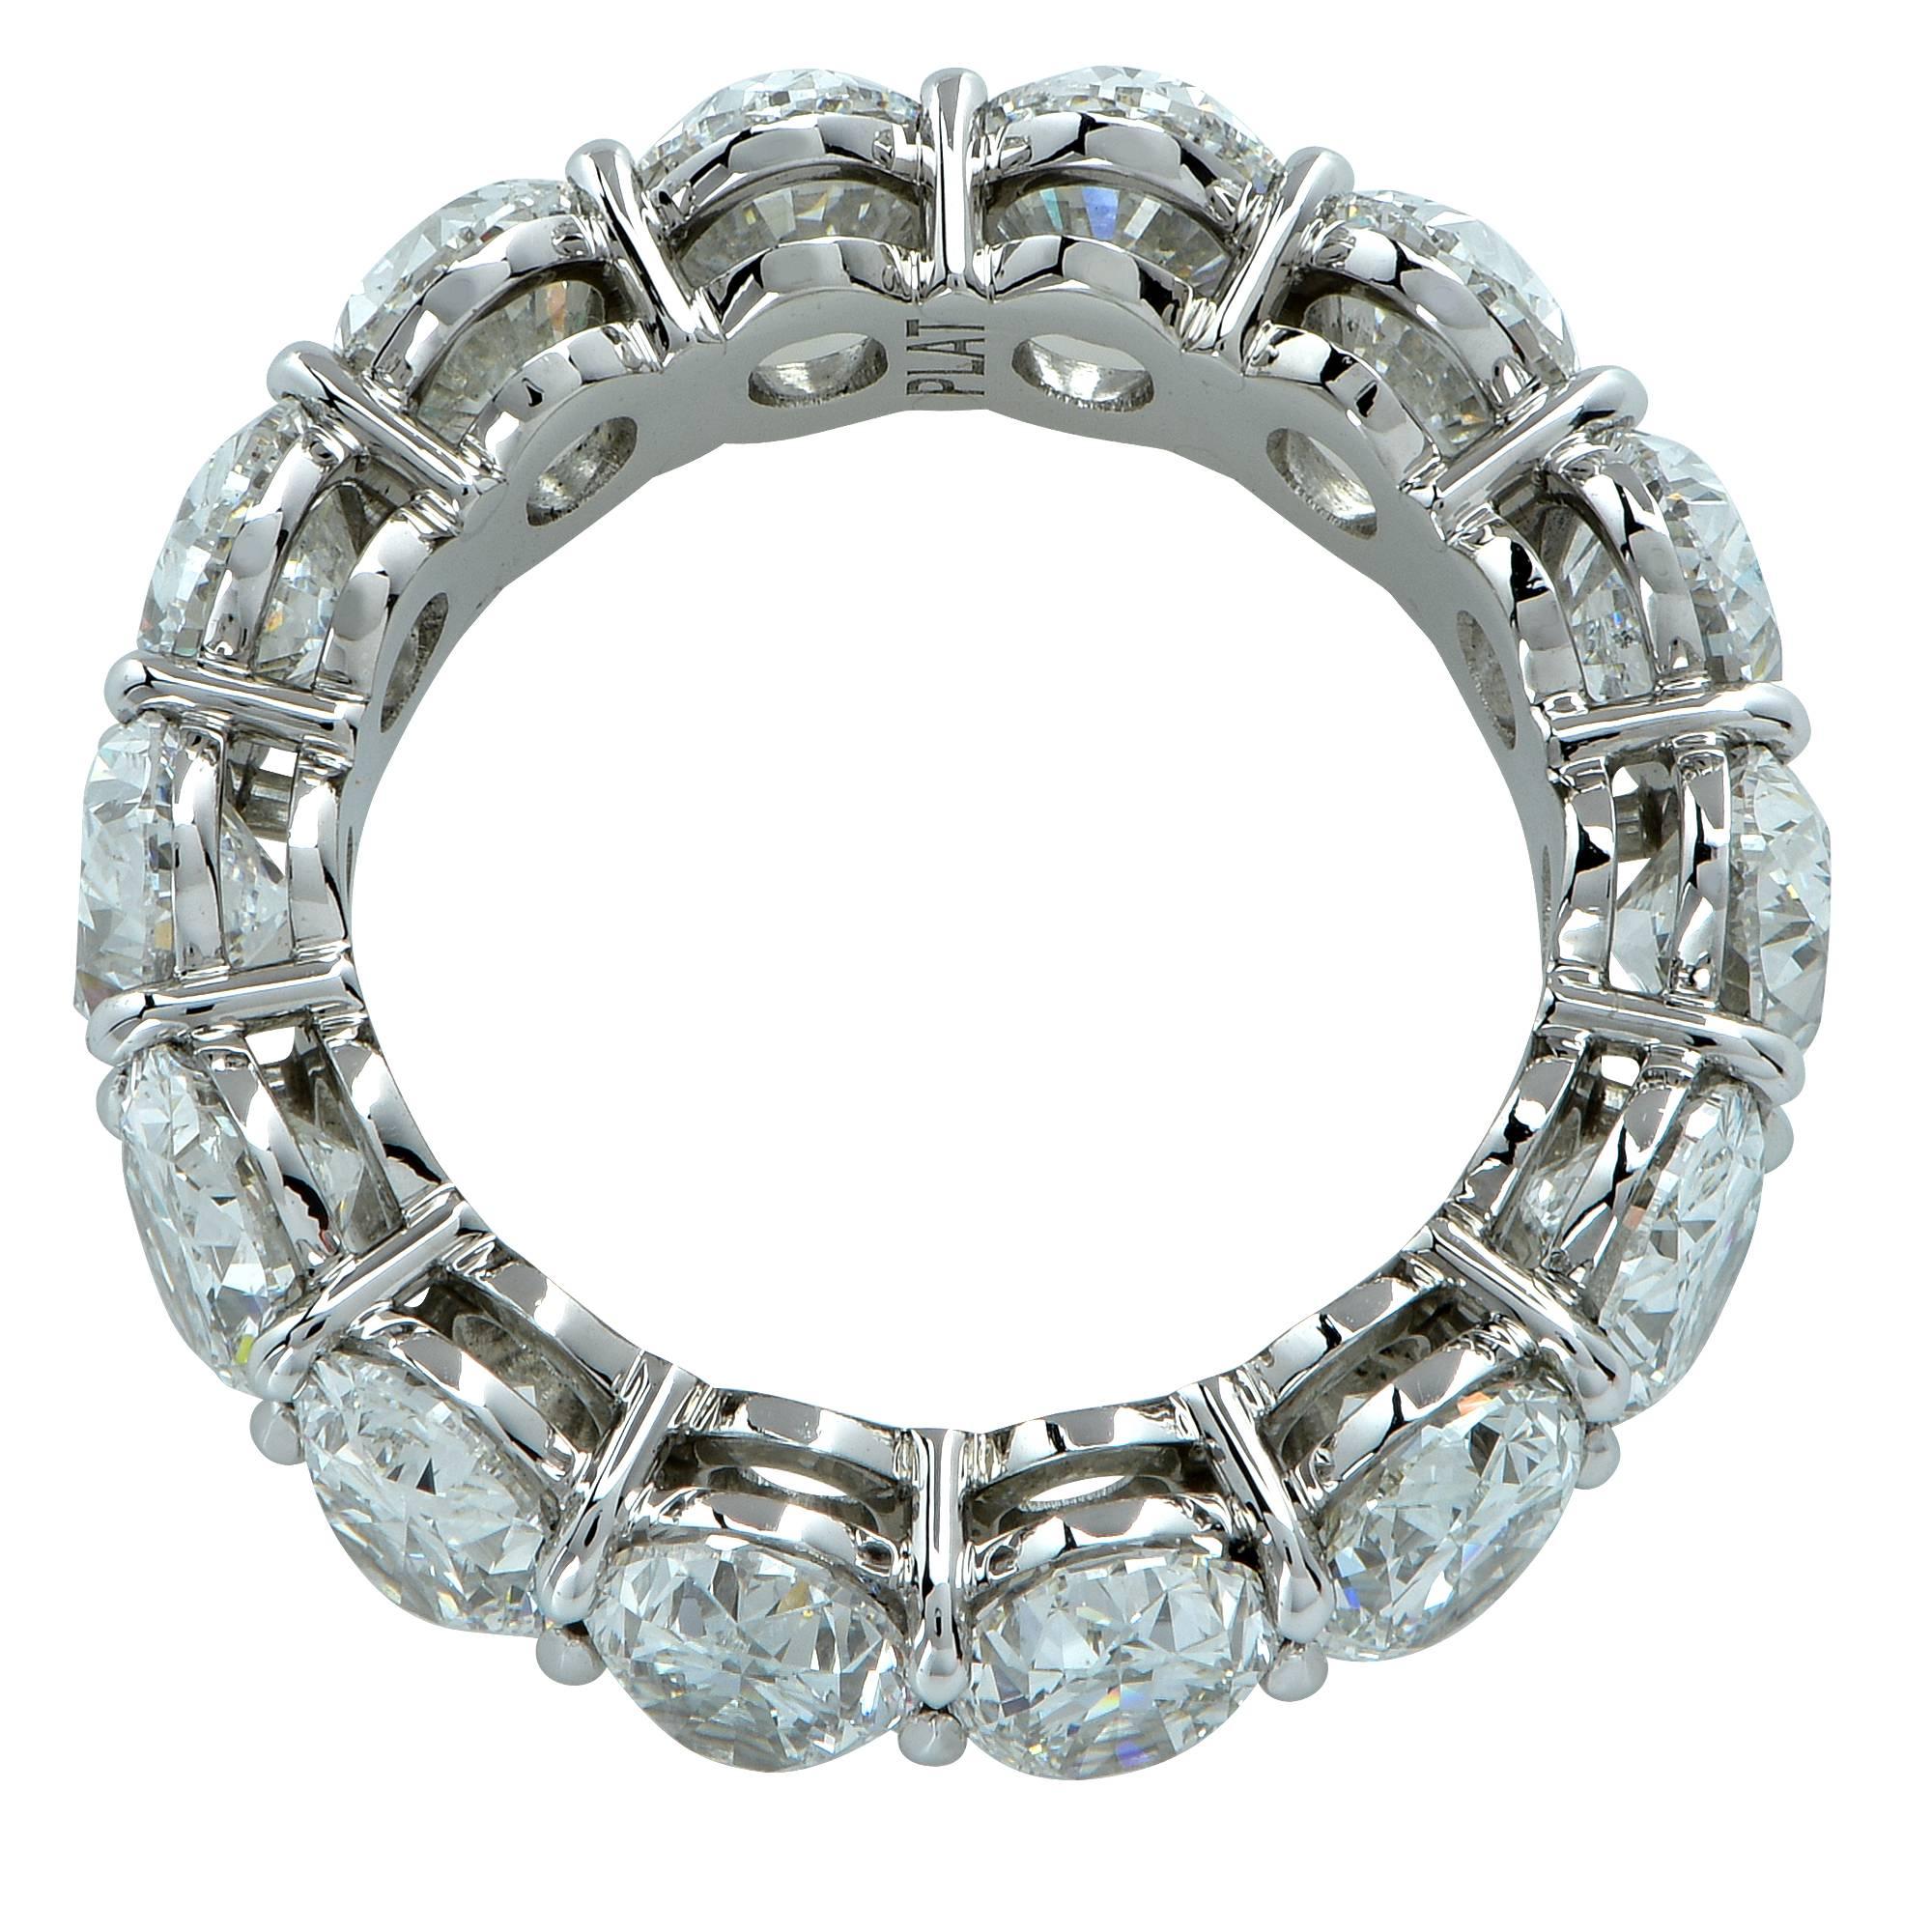 Spectacular eternity band crafted by hand in Platinum showcasing 14 stunning GIA certified Oval Brilliant cut diamonds weighing 9.92 carats total, F-G color, VS2-SI1 clarity. Each diamond is laser inscribed with the GIA report number. The diamonds